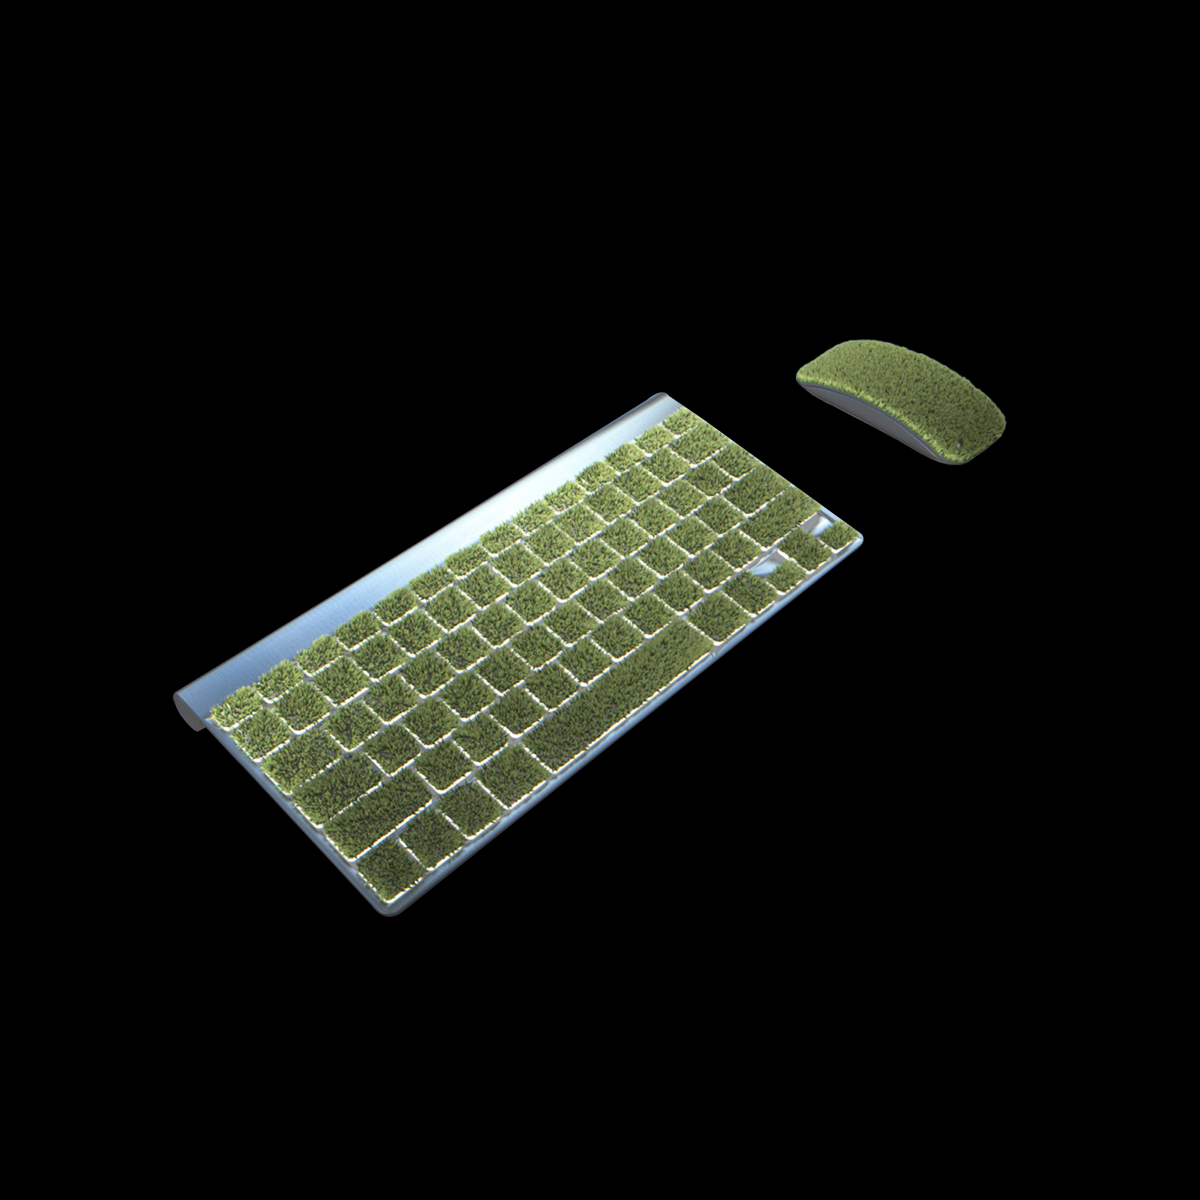 Touch Grass Keyboard and Mouse